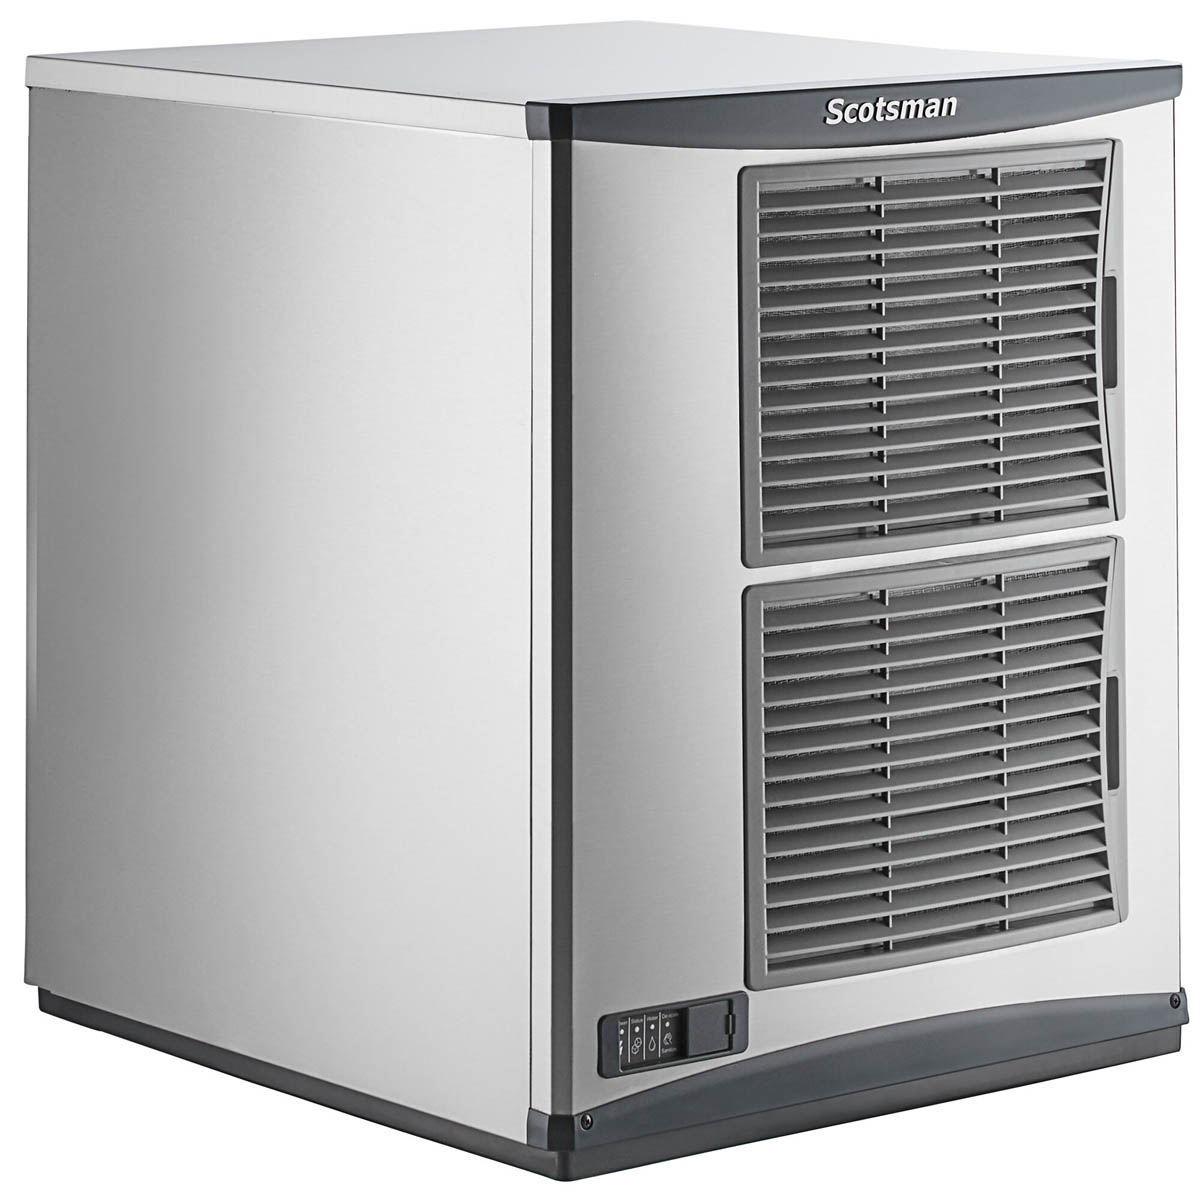 Scotsman FS1222A-3 22“ Air-Cooled Flake-Style Ice Maker, 1100 lbs/Day